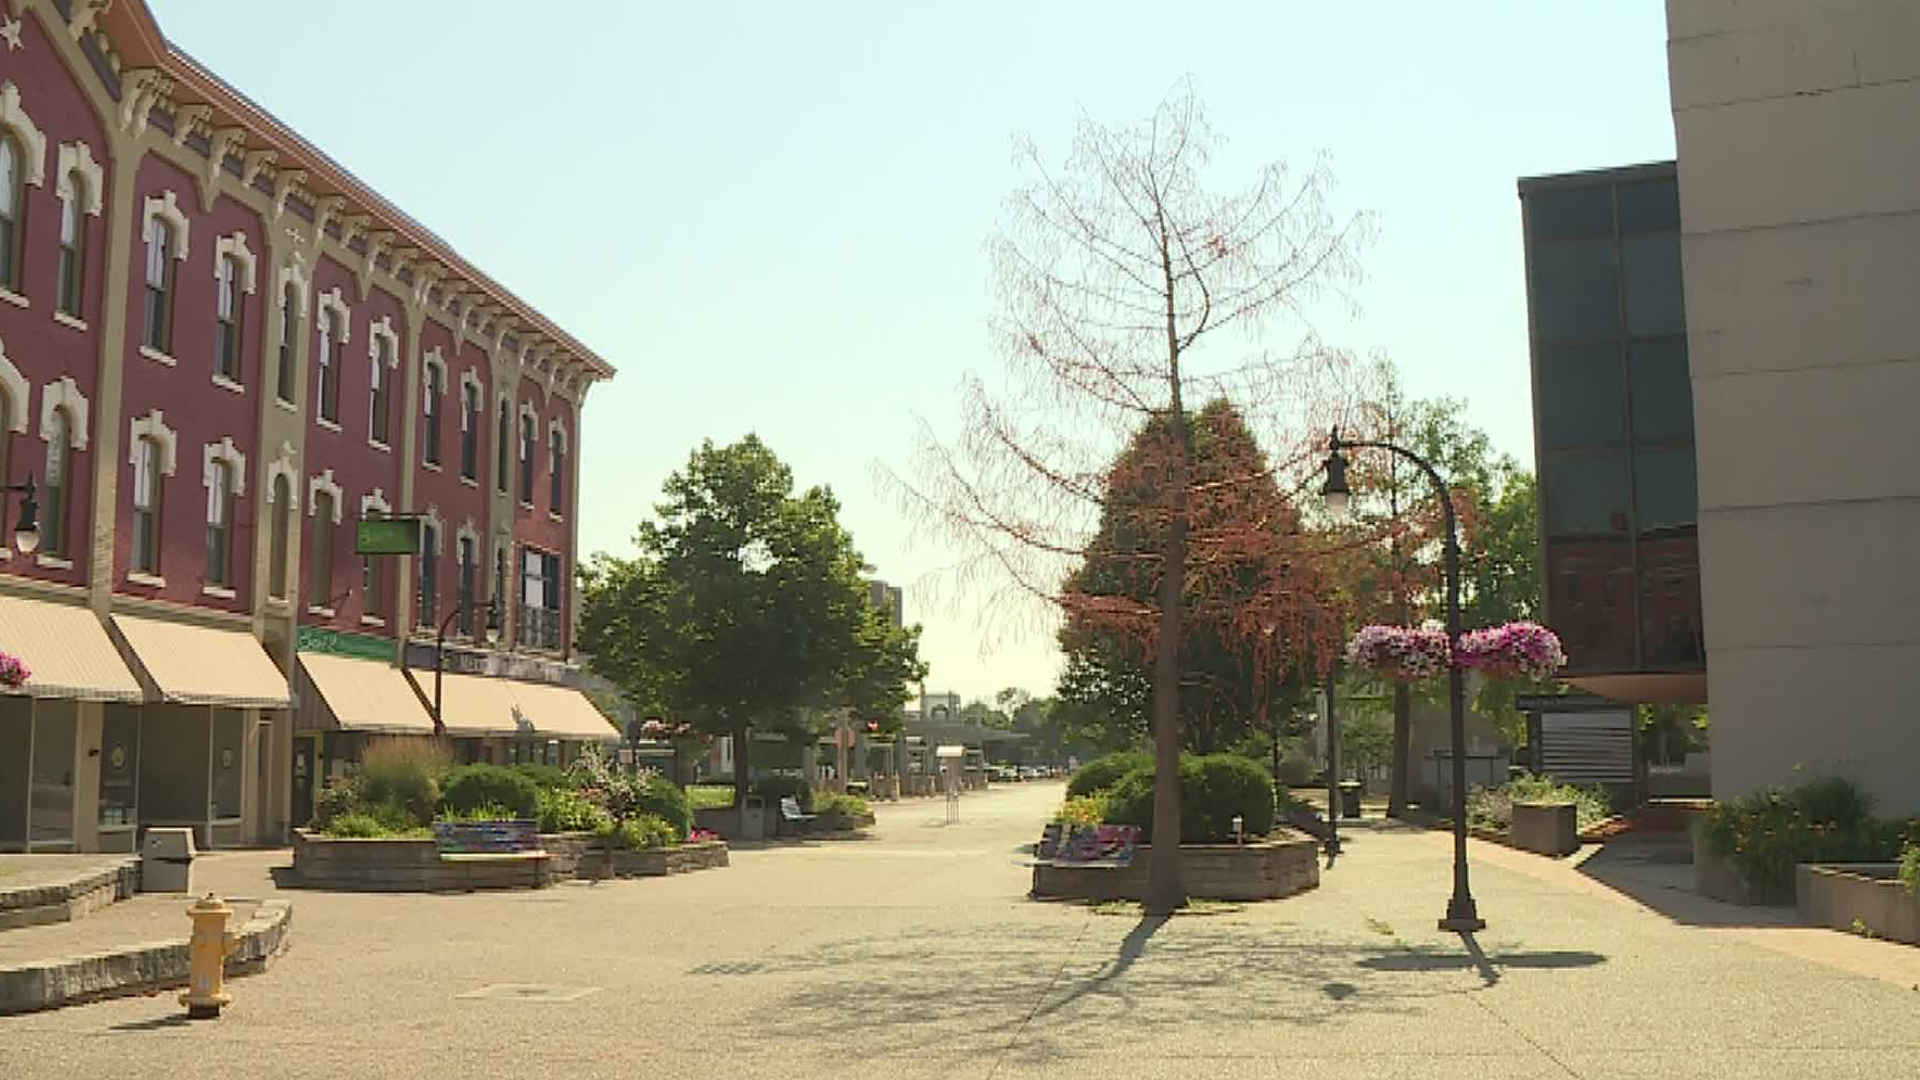 Downtown Rock Island Districts receive historic designation